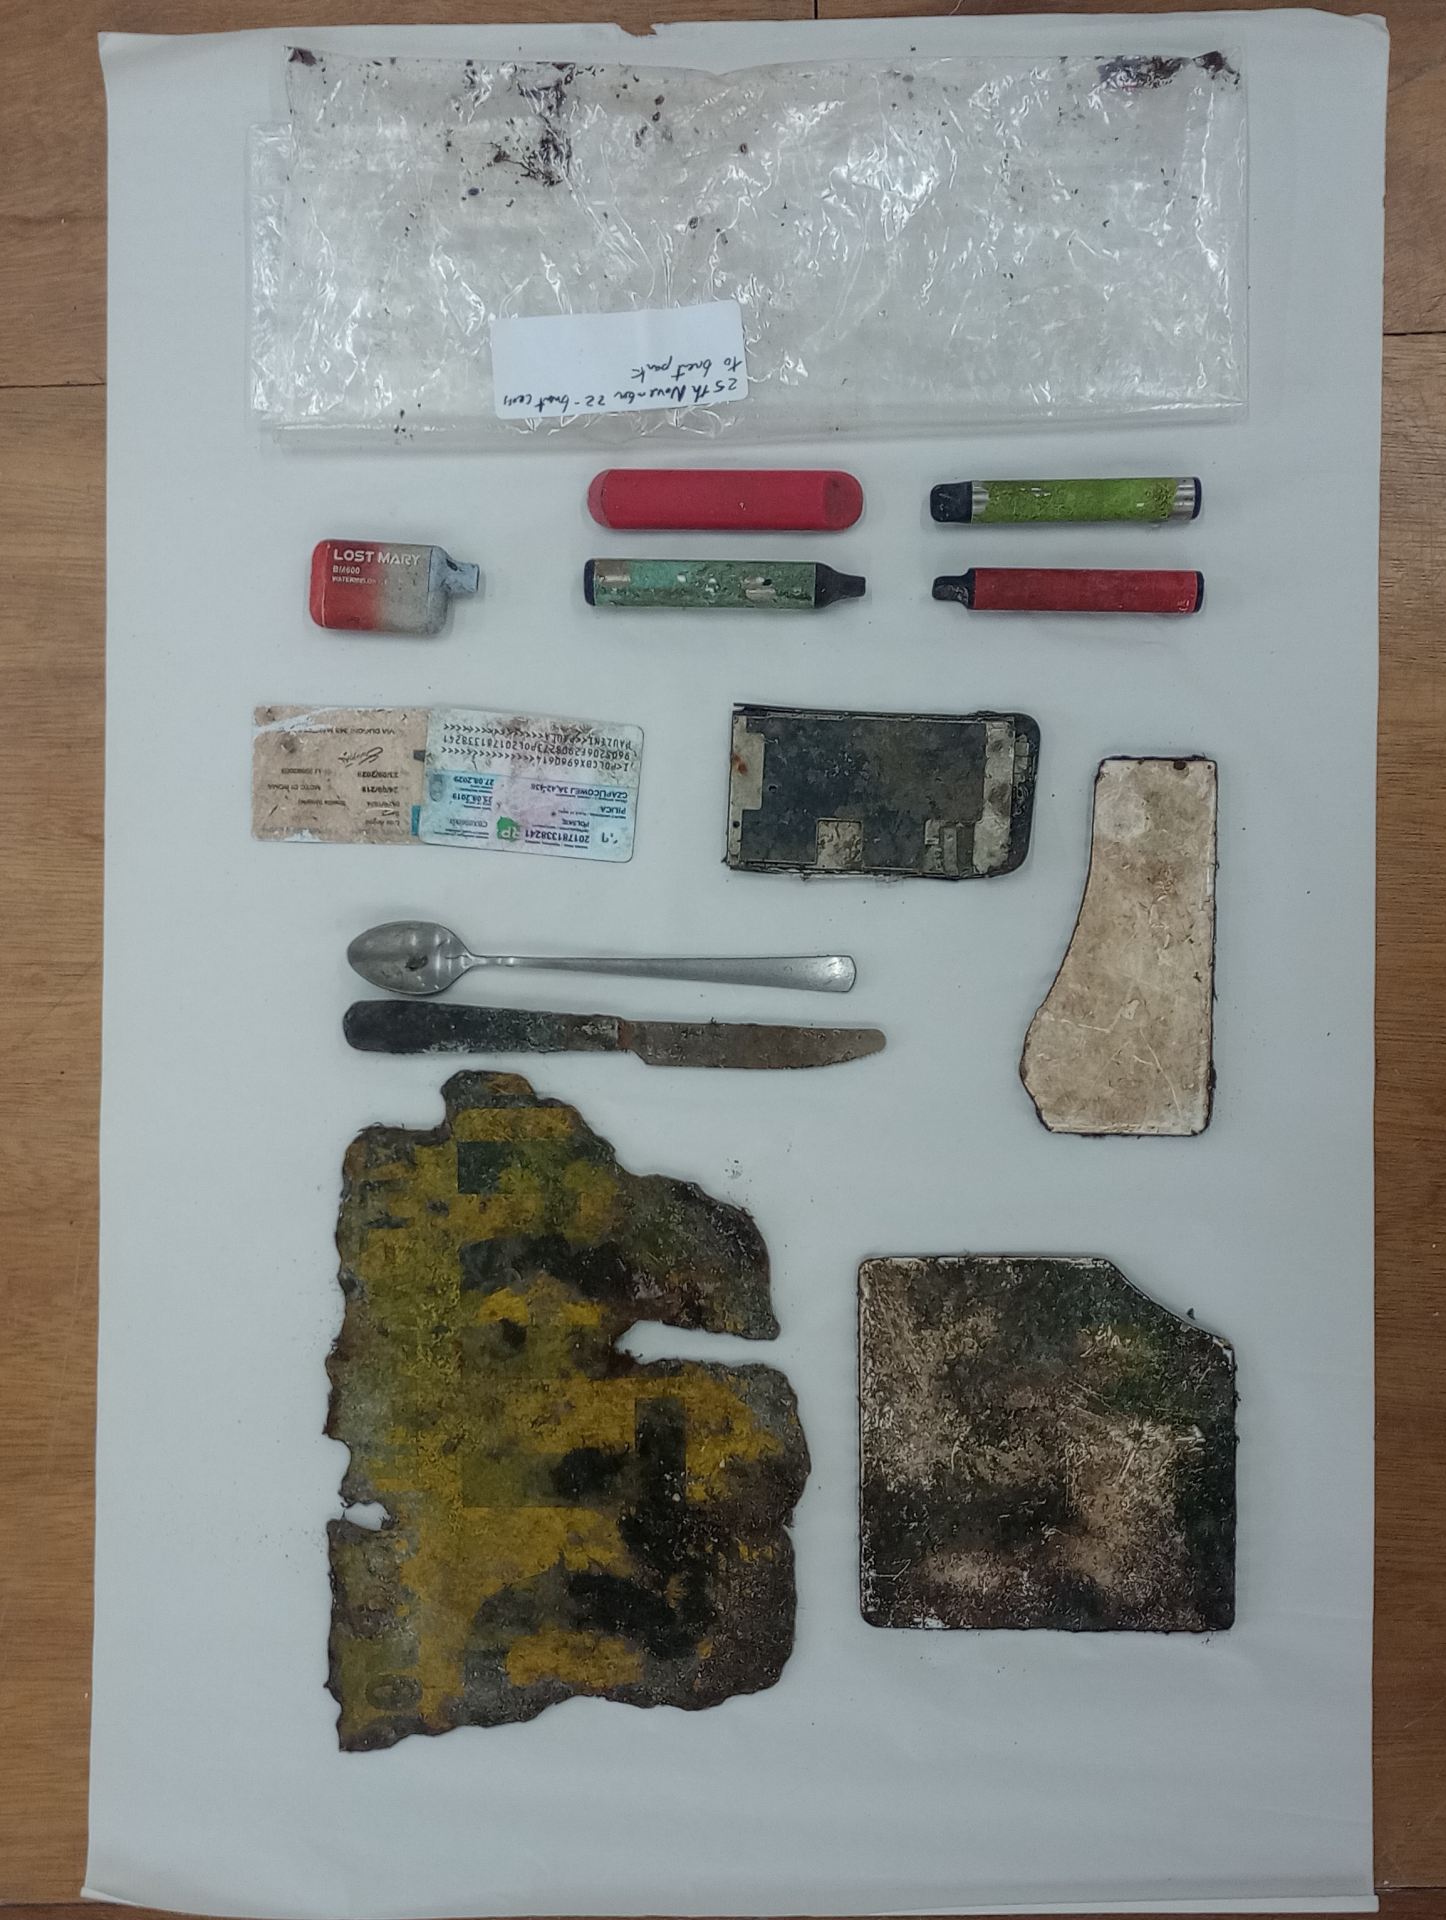 An image of various objects taken from London's waterways.